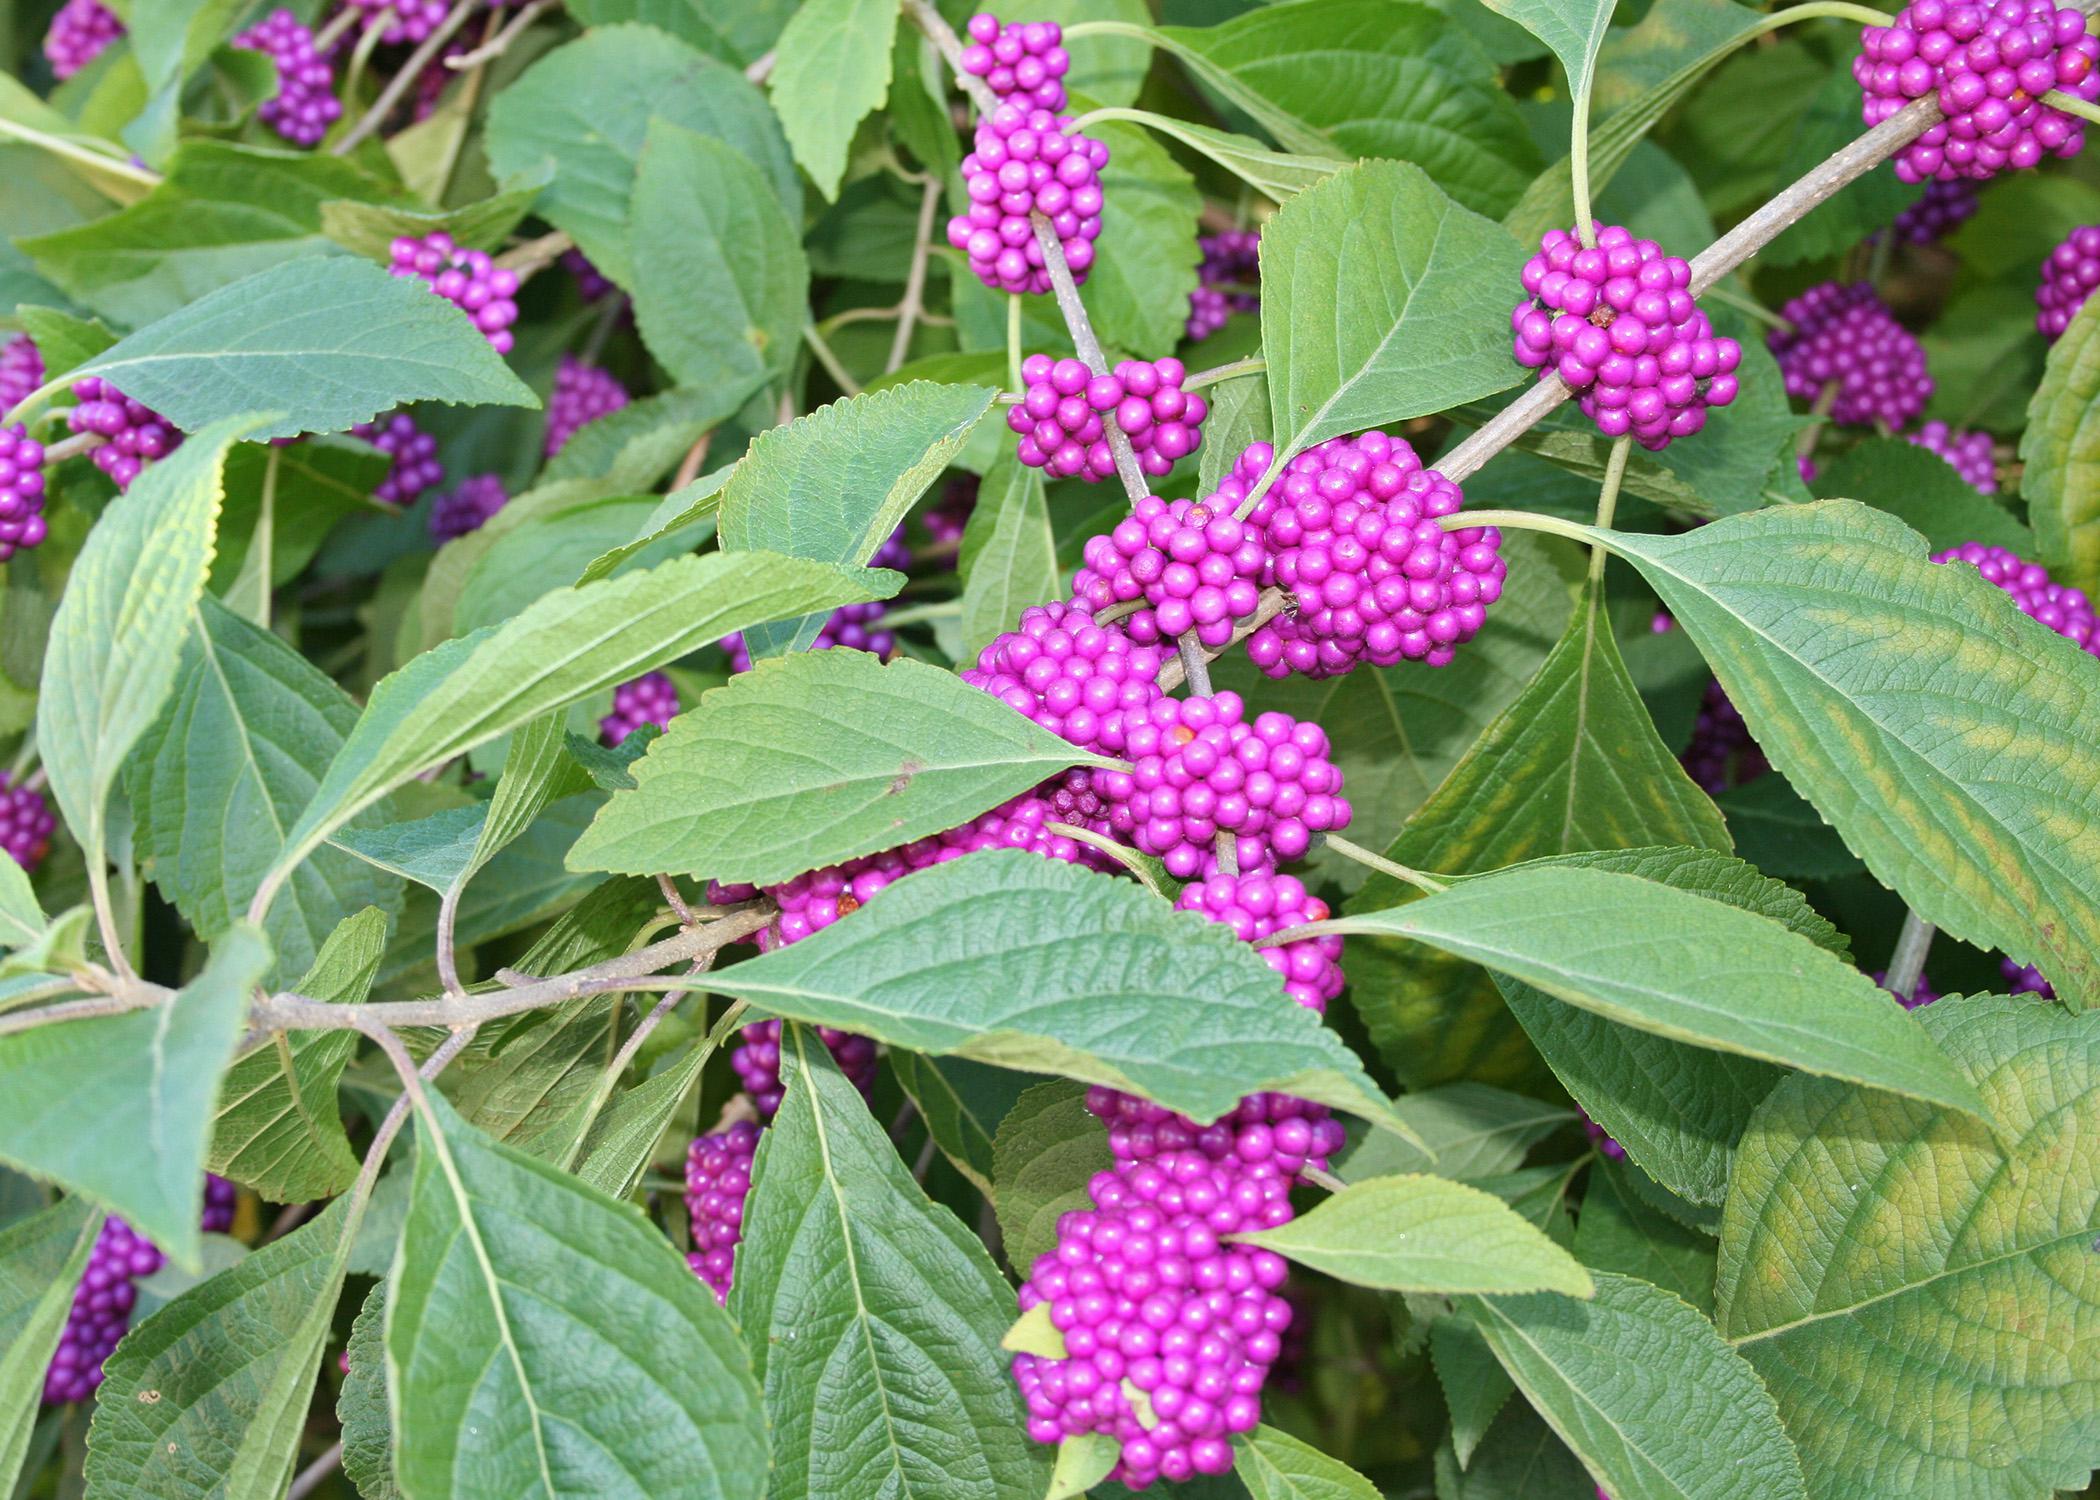 The American beautyberry is a native plant with three seasons of interest. Small flowers appear with the leaves in the spring, summer foliage is a rich green, and fall brings clusters of berries. (Photo by MSU Extension Service/Gary Bachman)